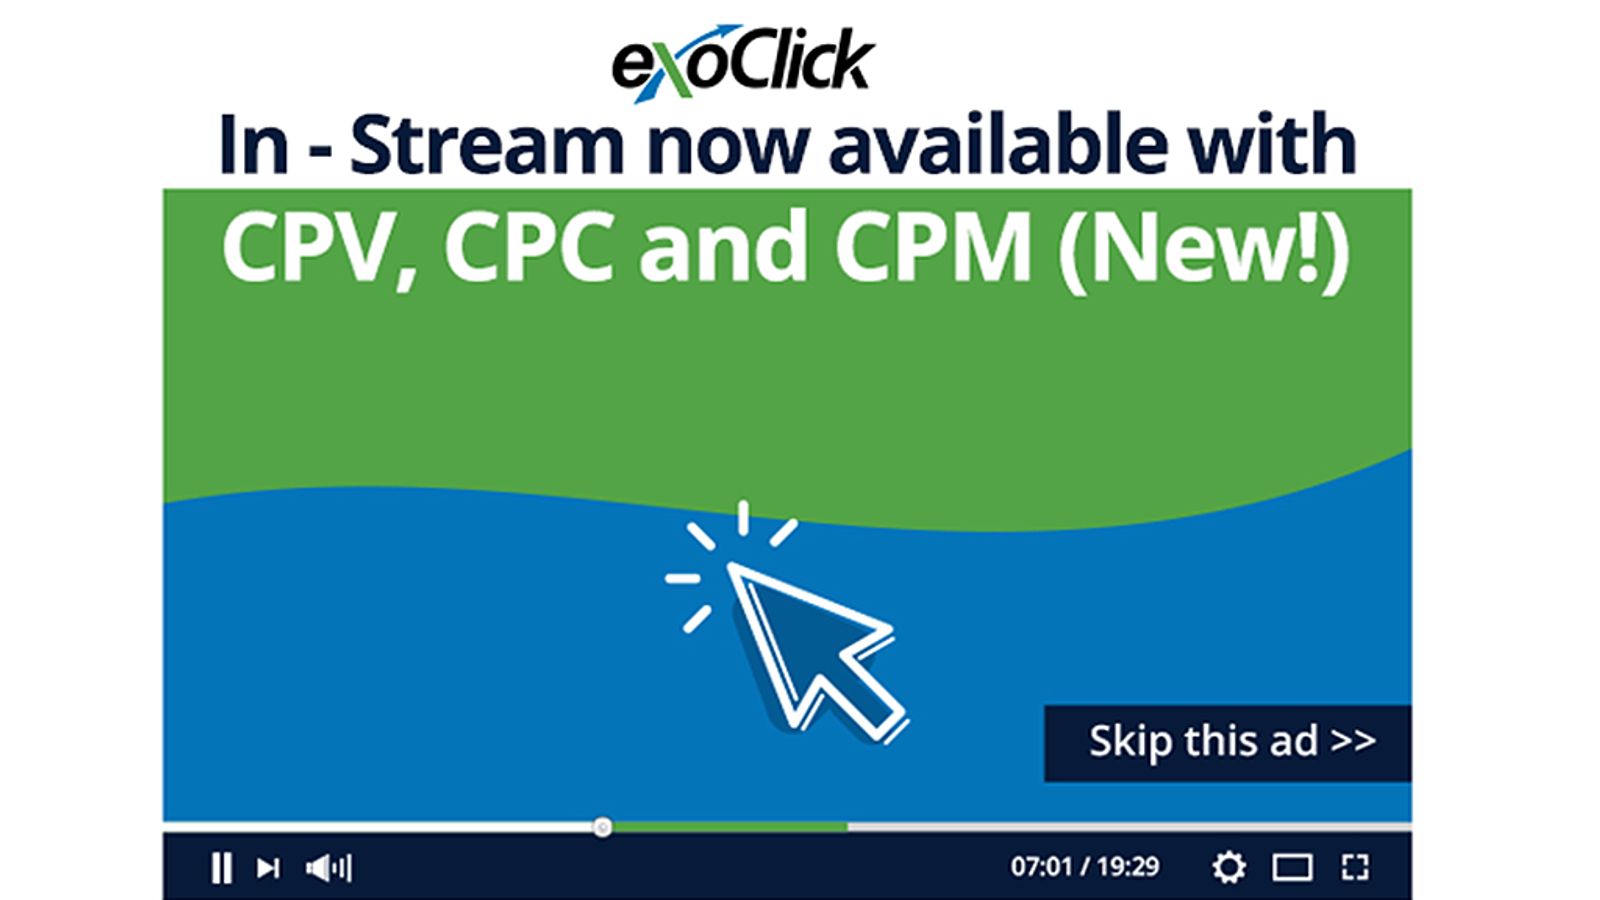 ExoClick Introduces CPM For Its Popular In-Stream Video Ad Format